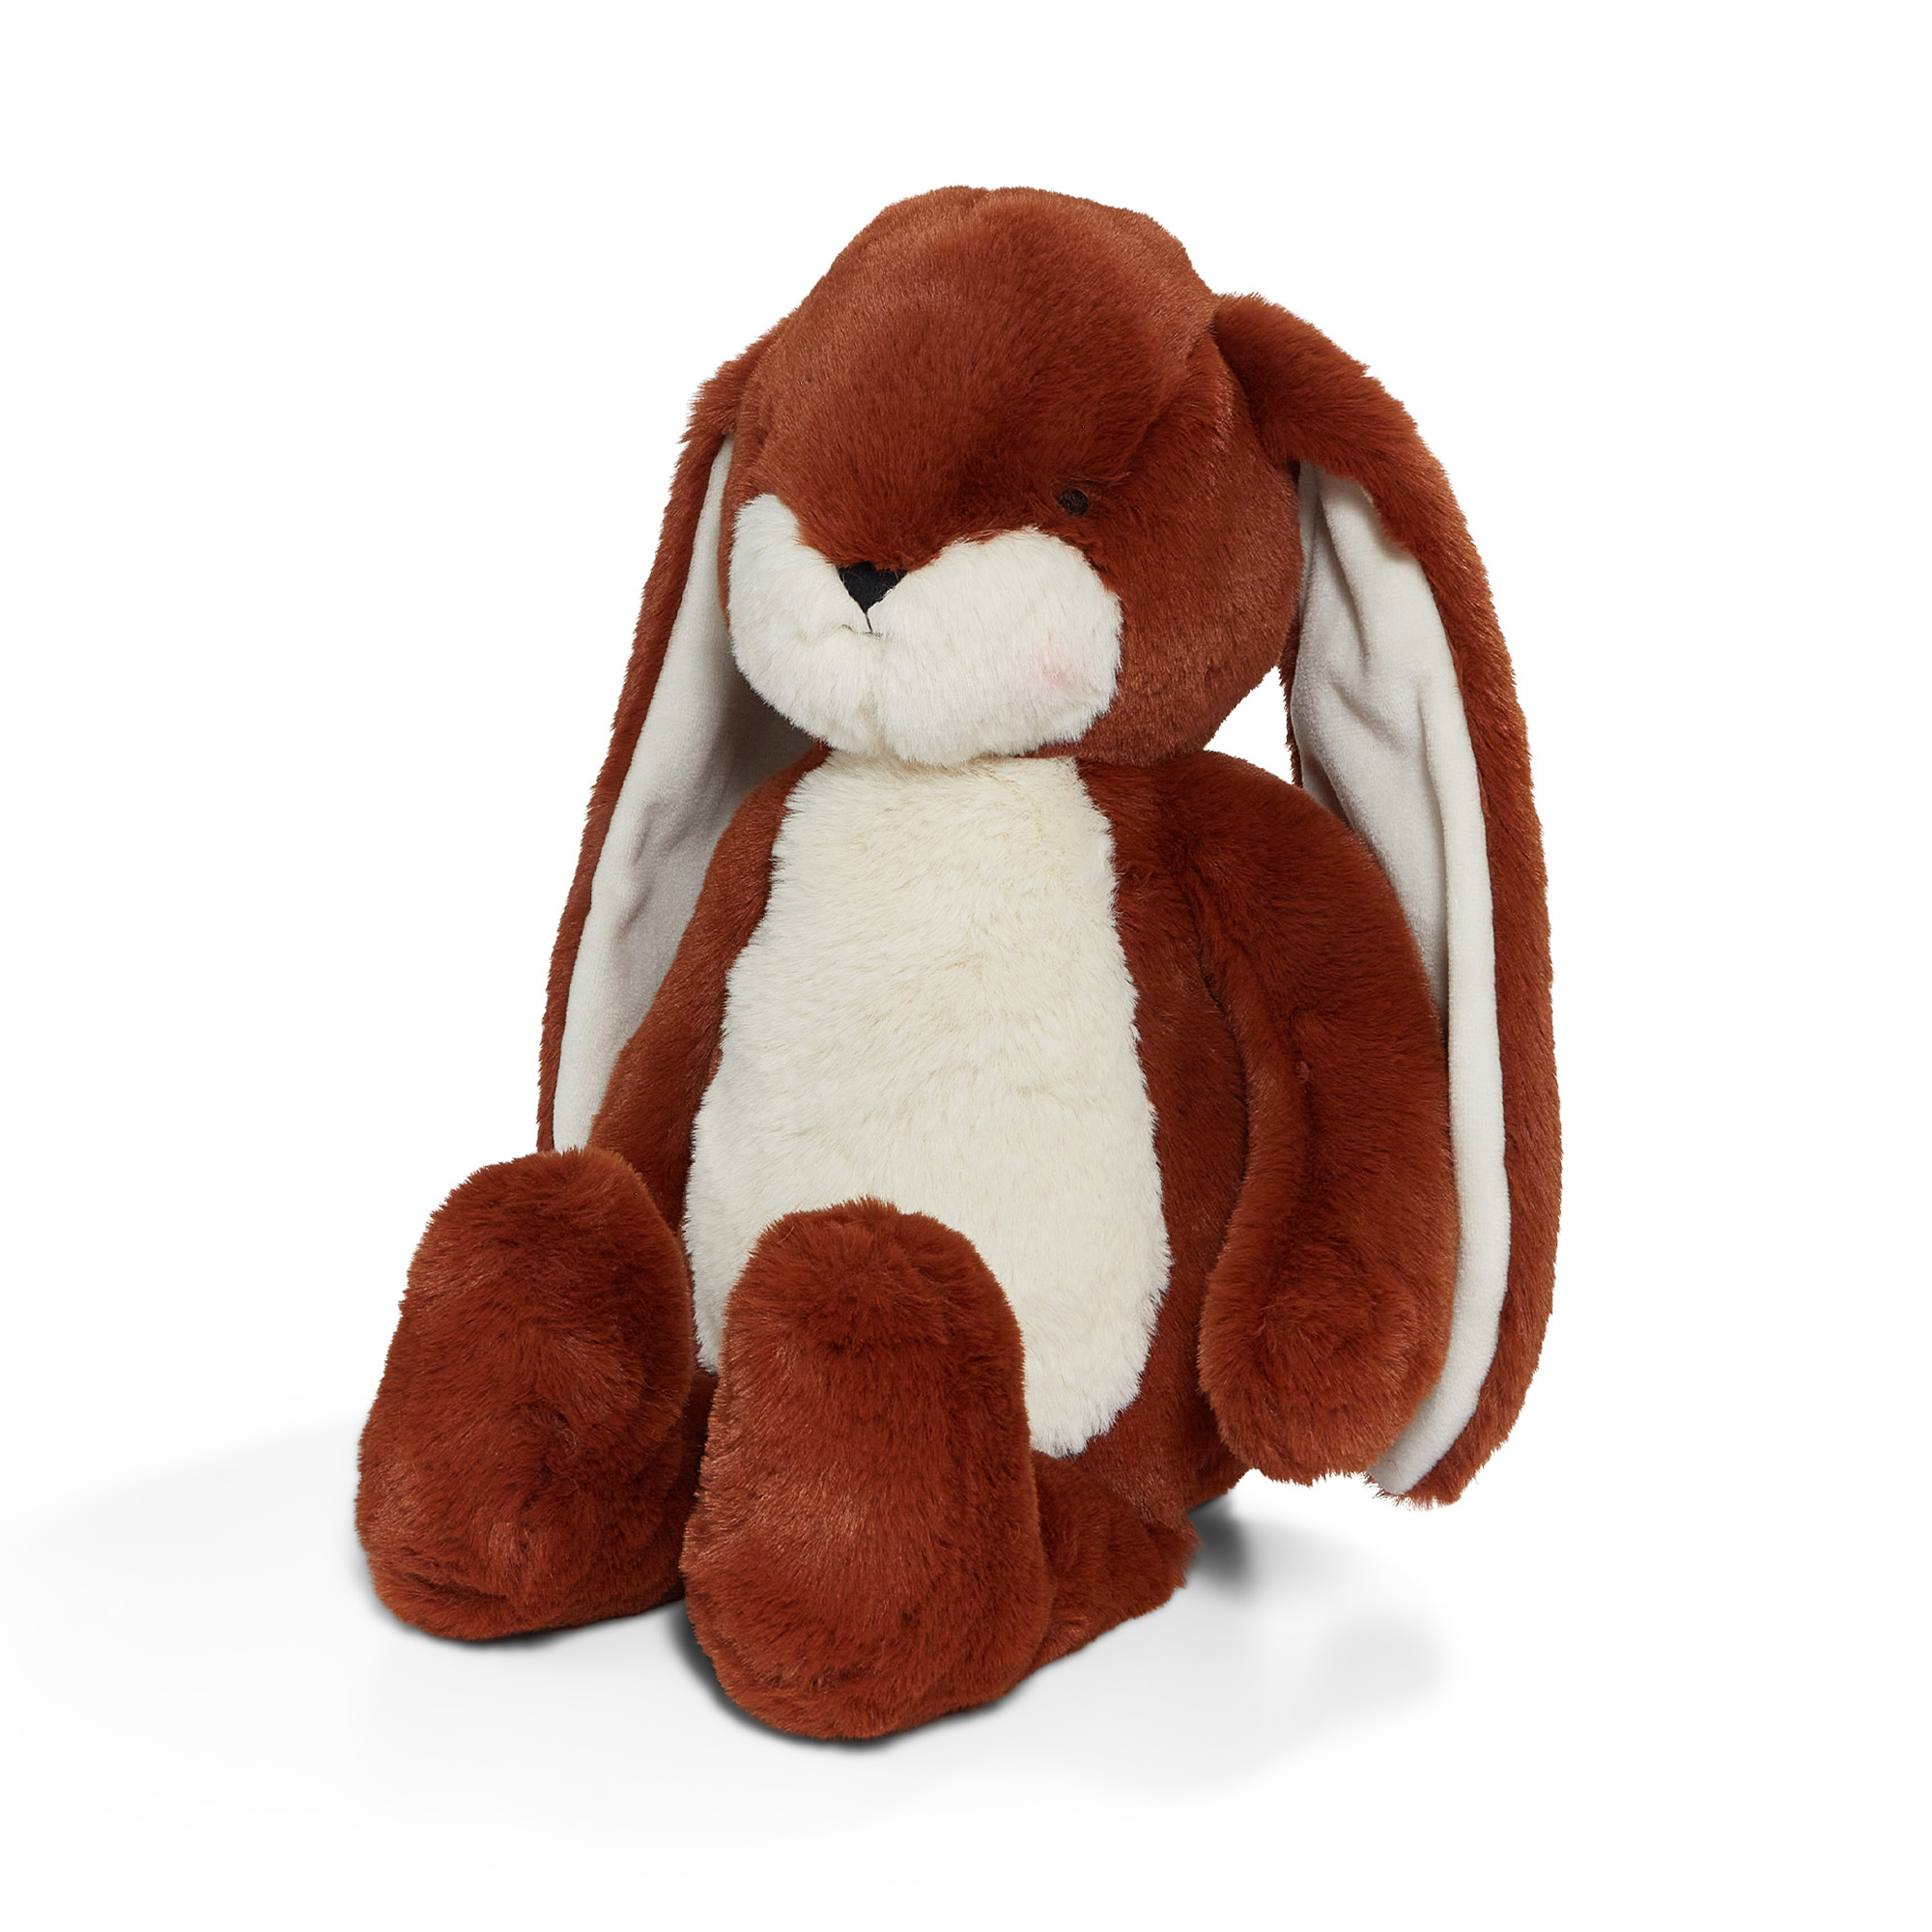 Peluche sweet nibble paprika 40cm - Bunnies By The Bay